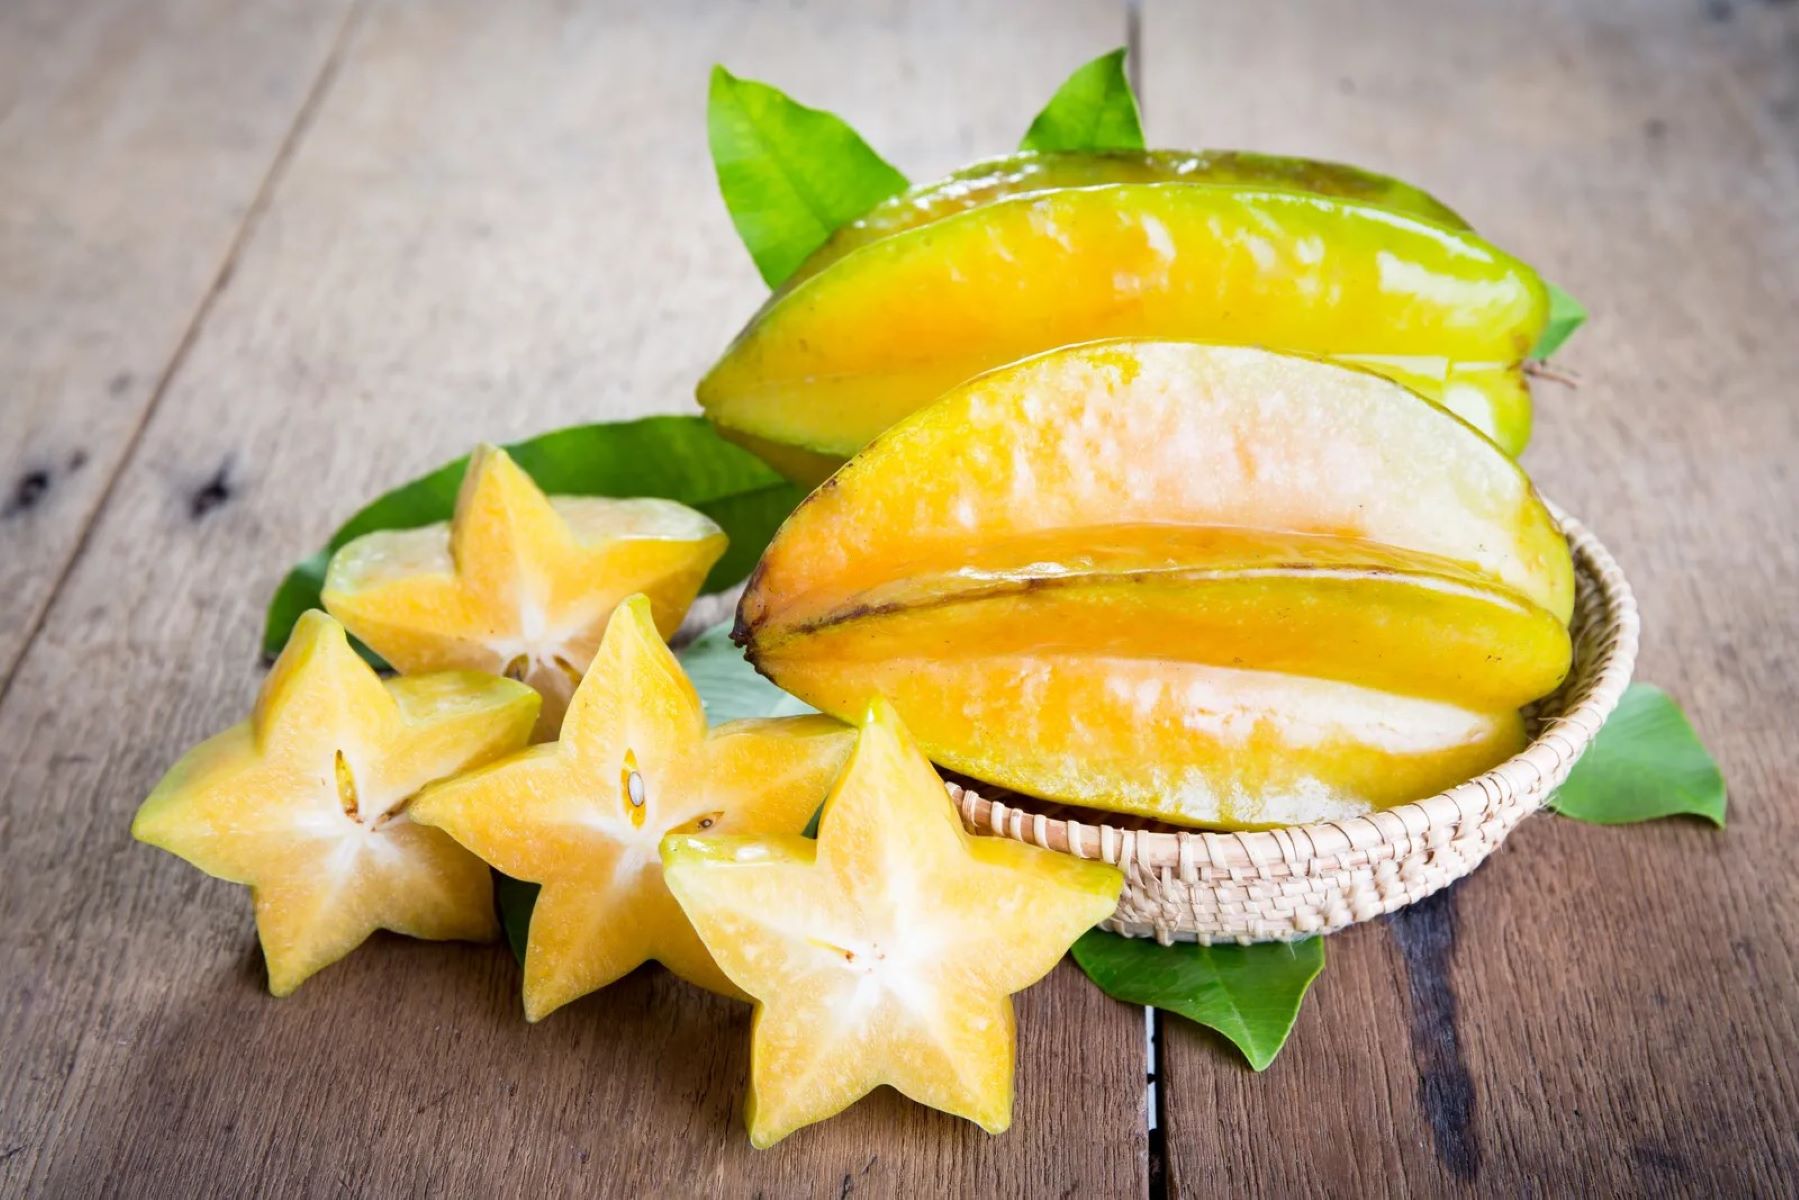 How To Tell If Starfruit Is Ripe